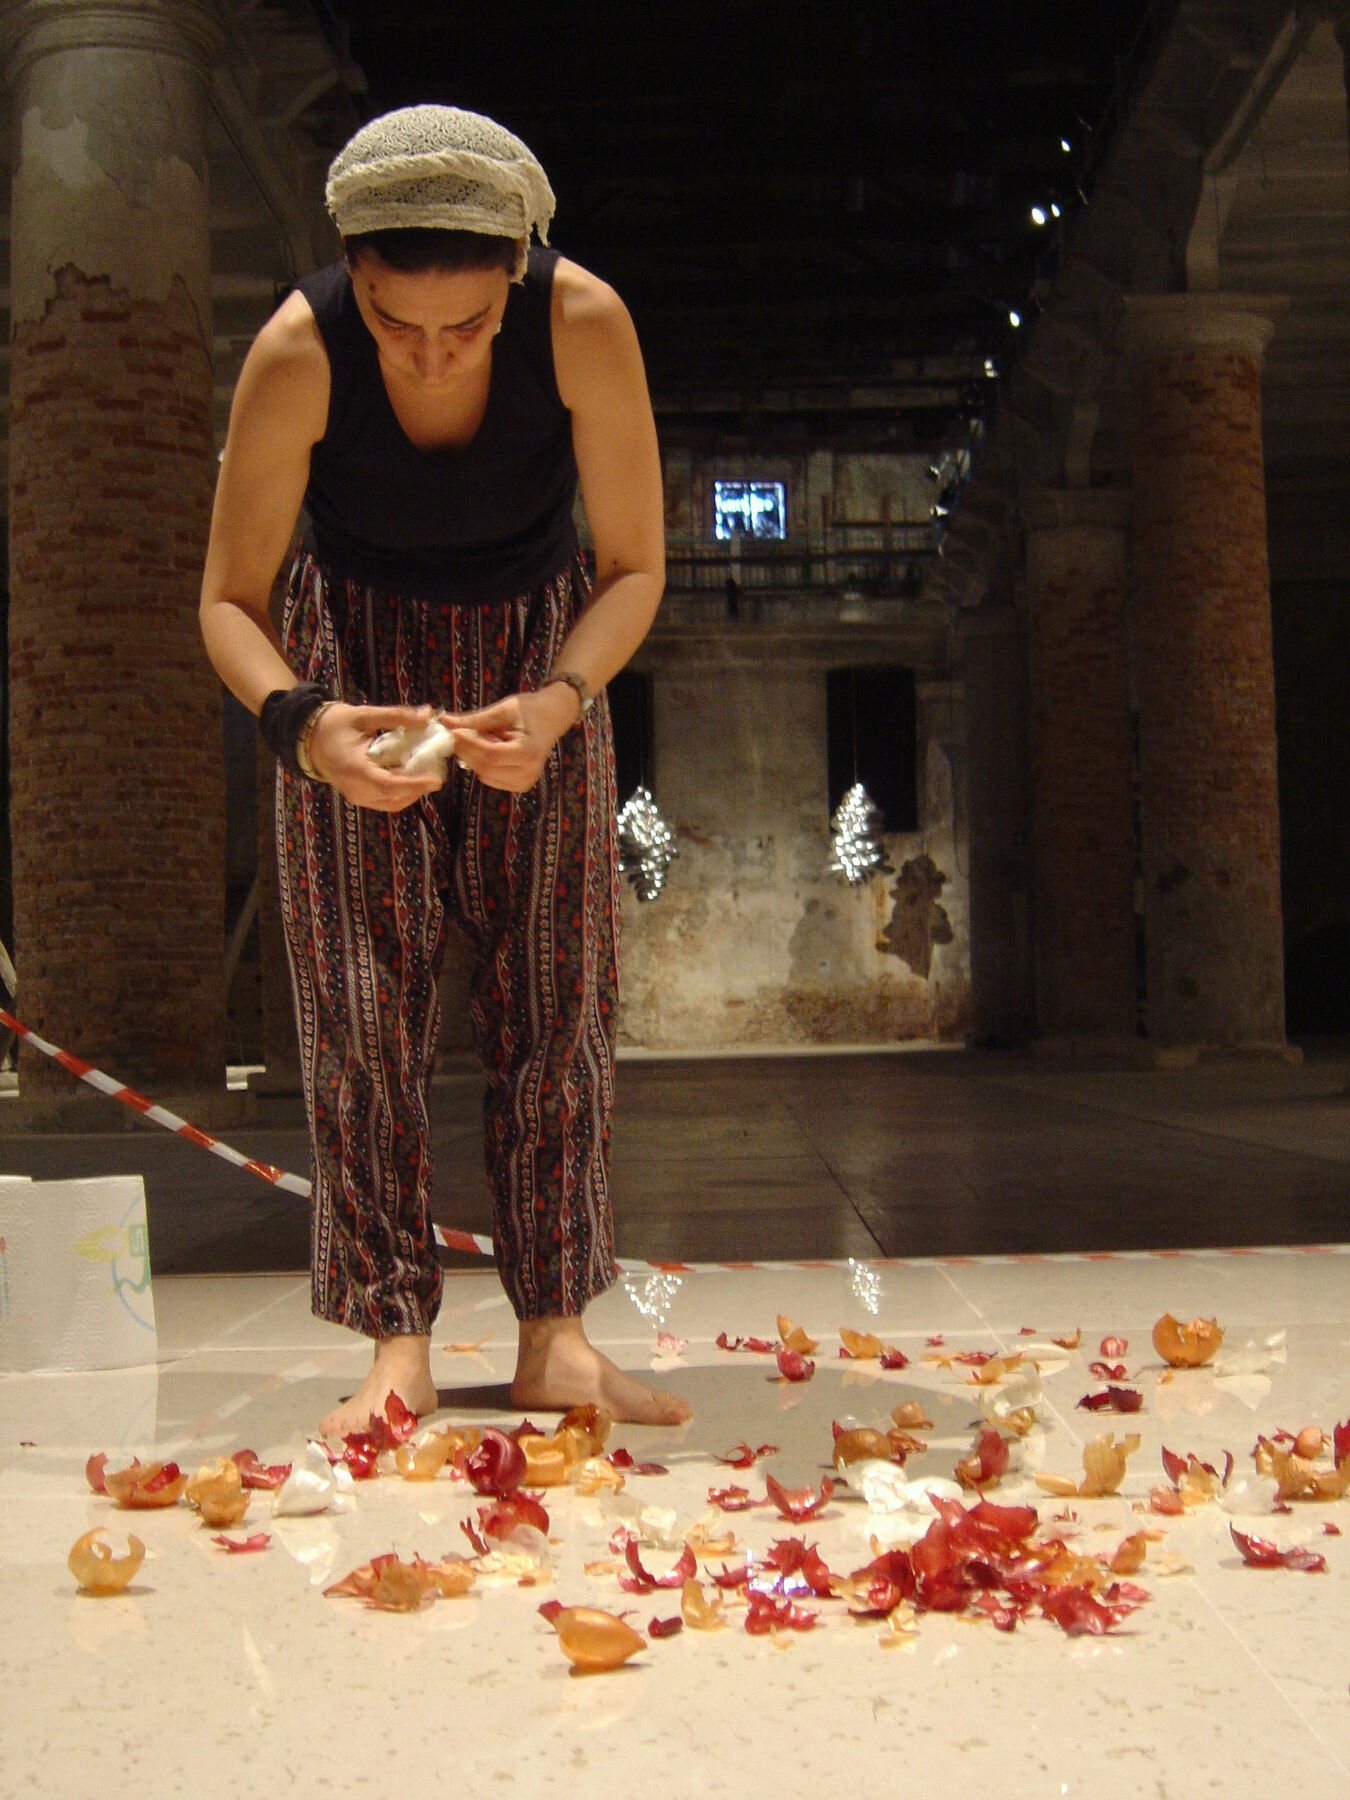 Artist standing barefoot on roped-off section in a dark room, placing torn onion peels on well-lit slab